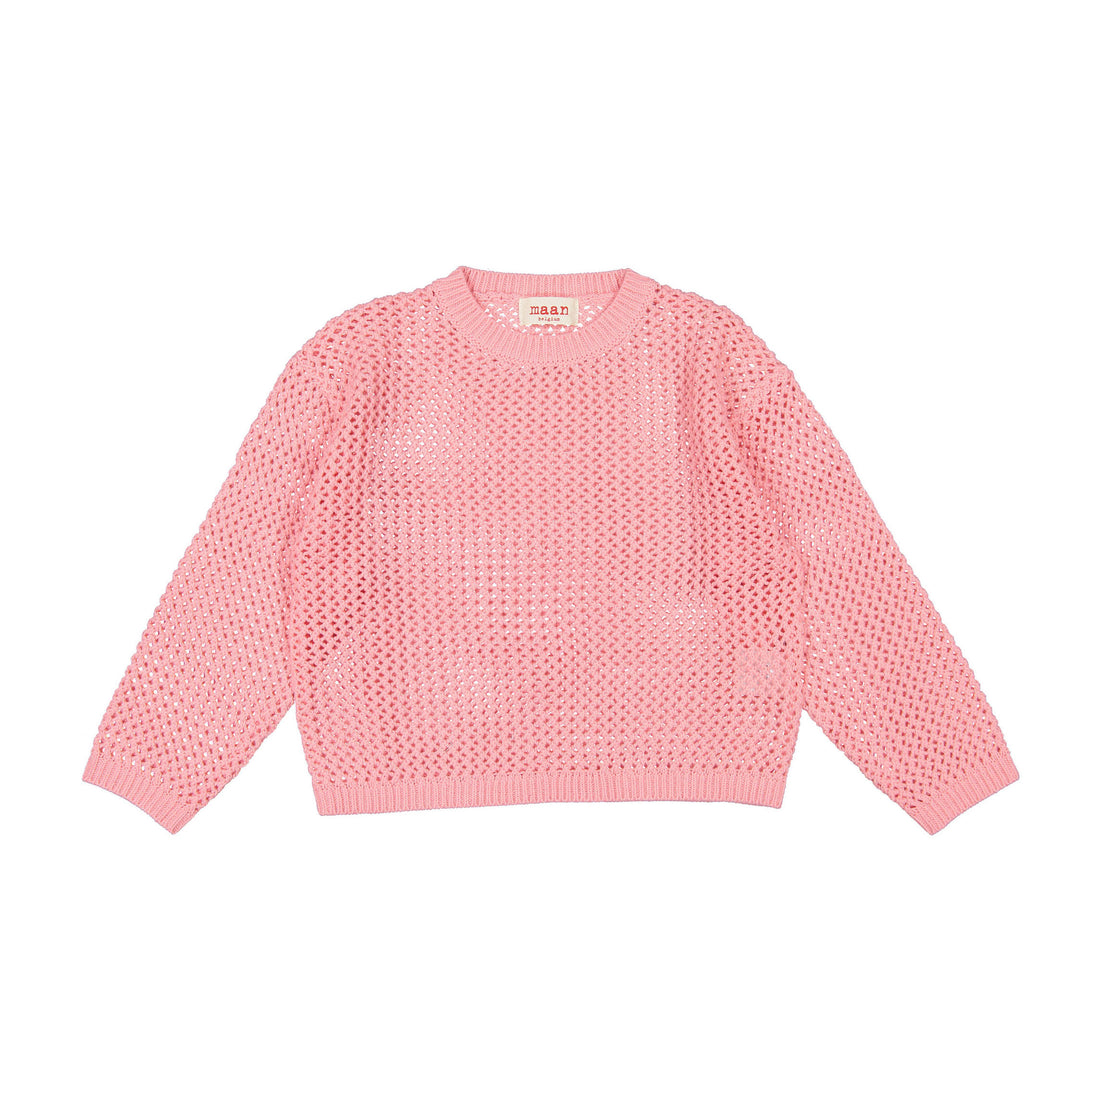 Maan Pink Knit Simca Pullover